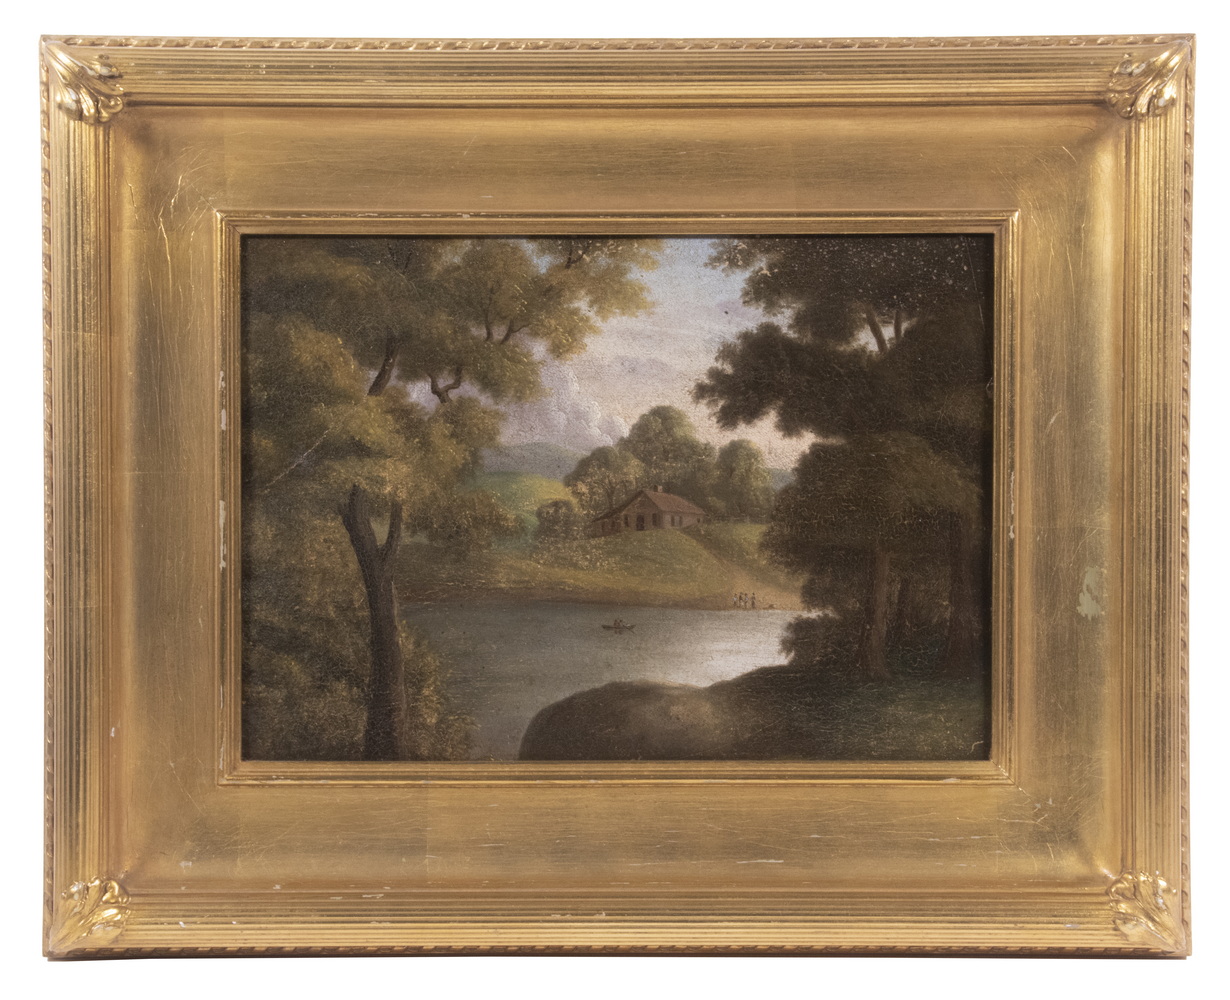 UNSIGNED MID-19TH C. FRONTIER LANDSCAPE